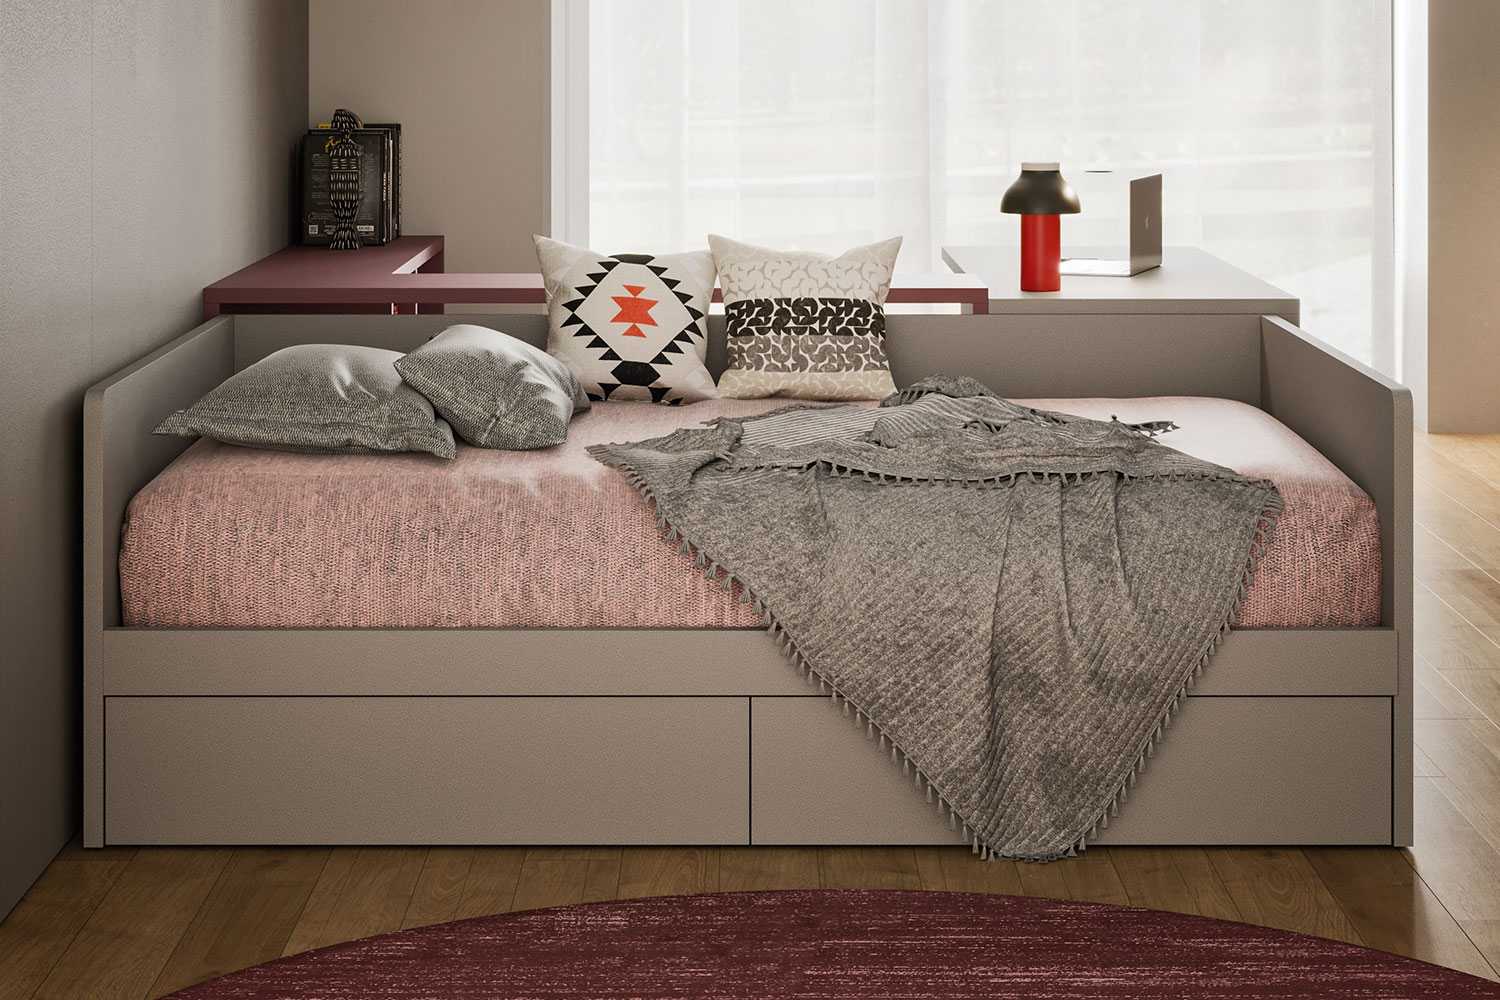 Small sofa bed for teens' bedrooms Apollo